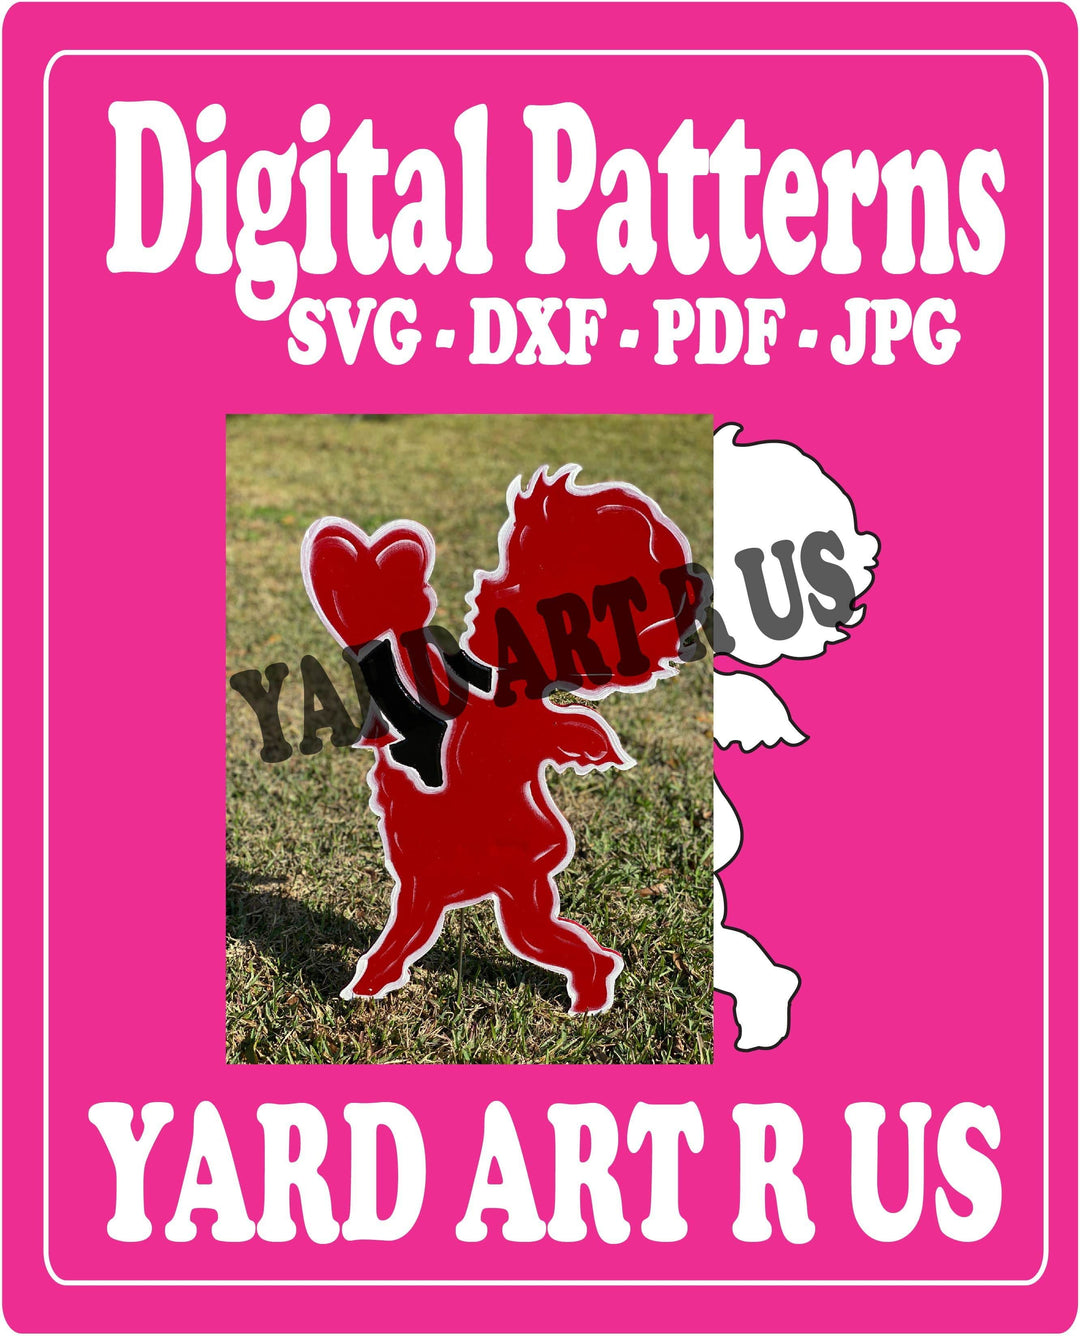 Cupid holding heart digital pattern; SVG, DXF, PDF, and JPG file options